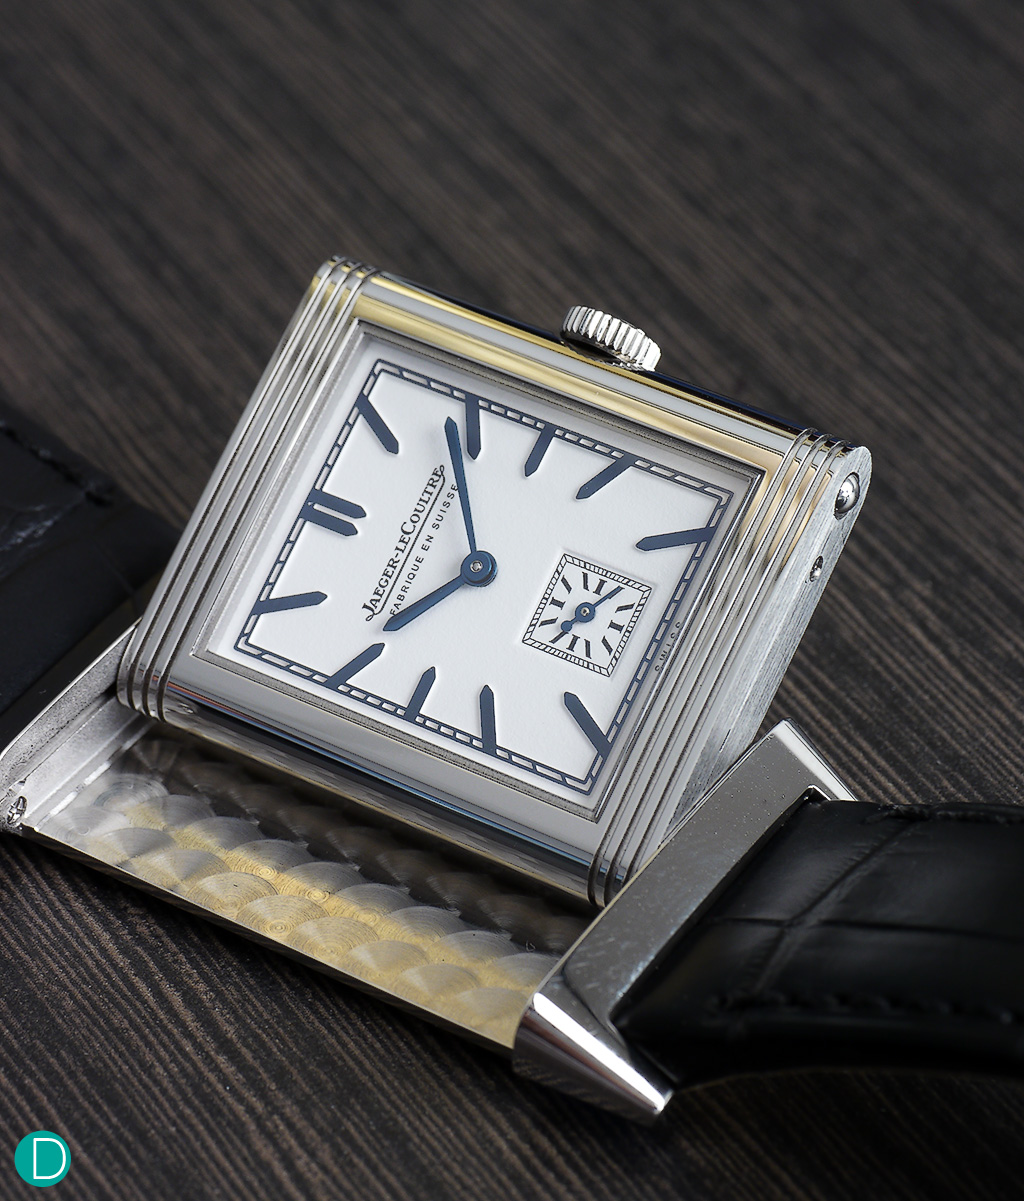 The Jaeger LeCoultre Reverso 1948 Ultra-Thin, with its iconic reversible case. 